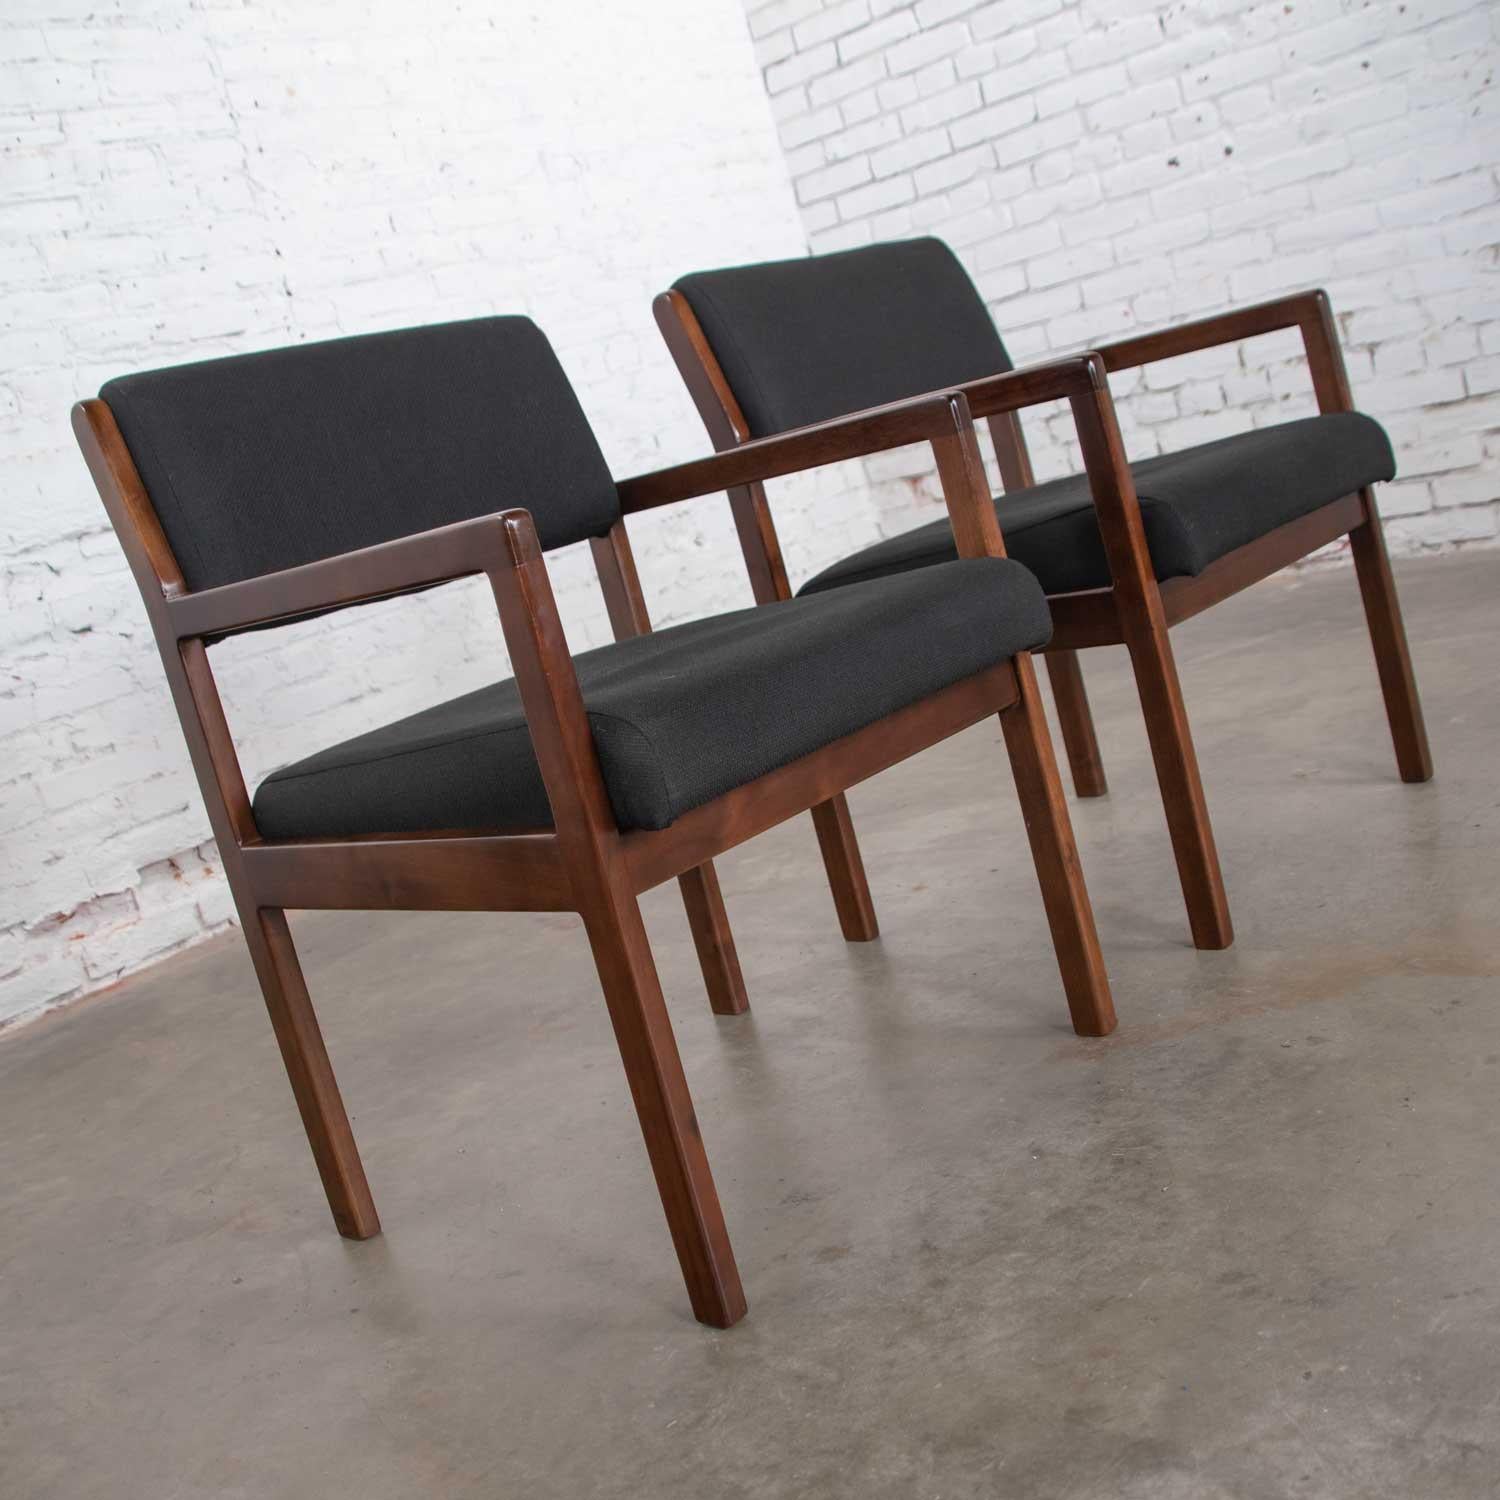 Modern Pair of Black and Walnut Tone Wood Accent or Dining Armchairs by Haworth In Good Condition For Sale In Topeka, KS